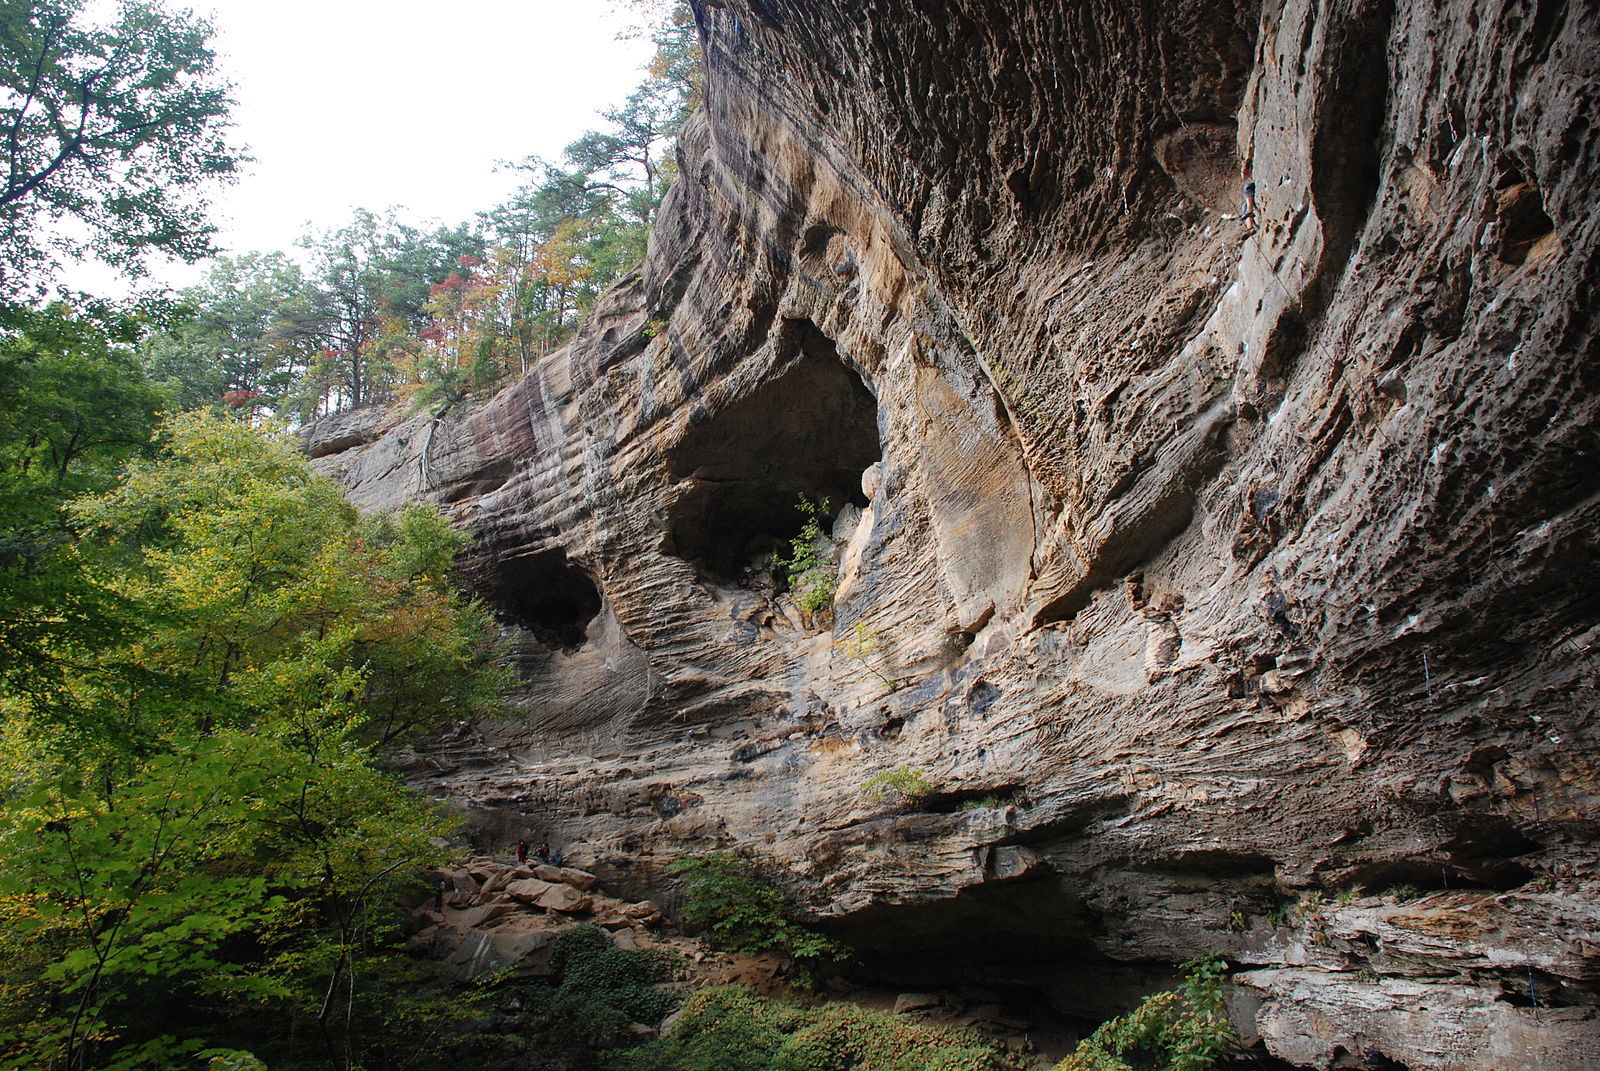 Kentucky wilderness - for some lesser-witnessed sightseeing in the USA